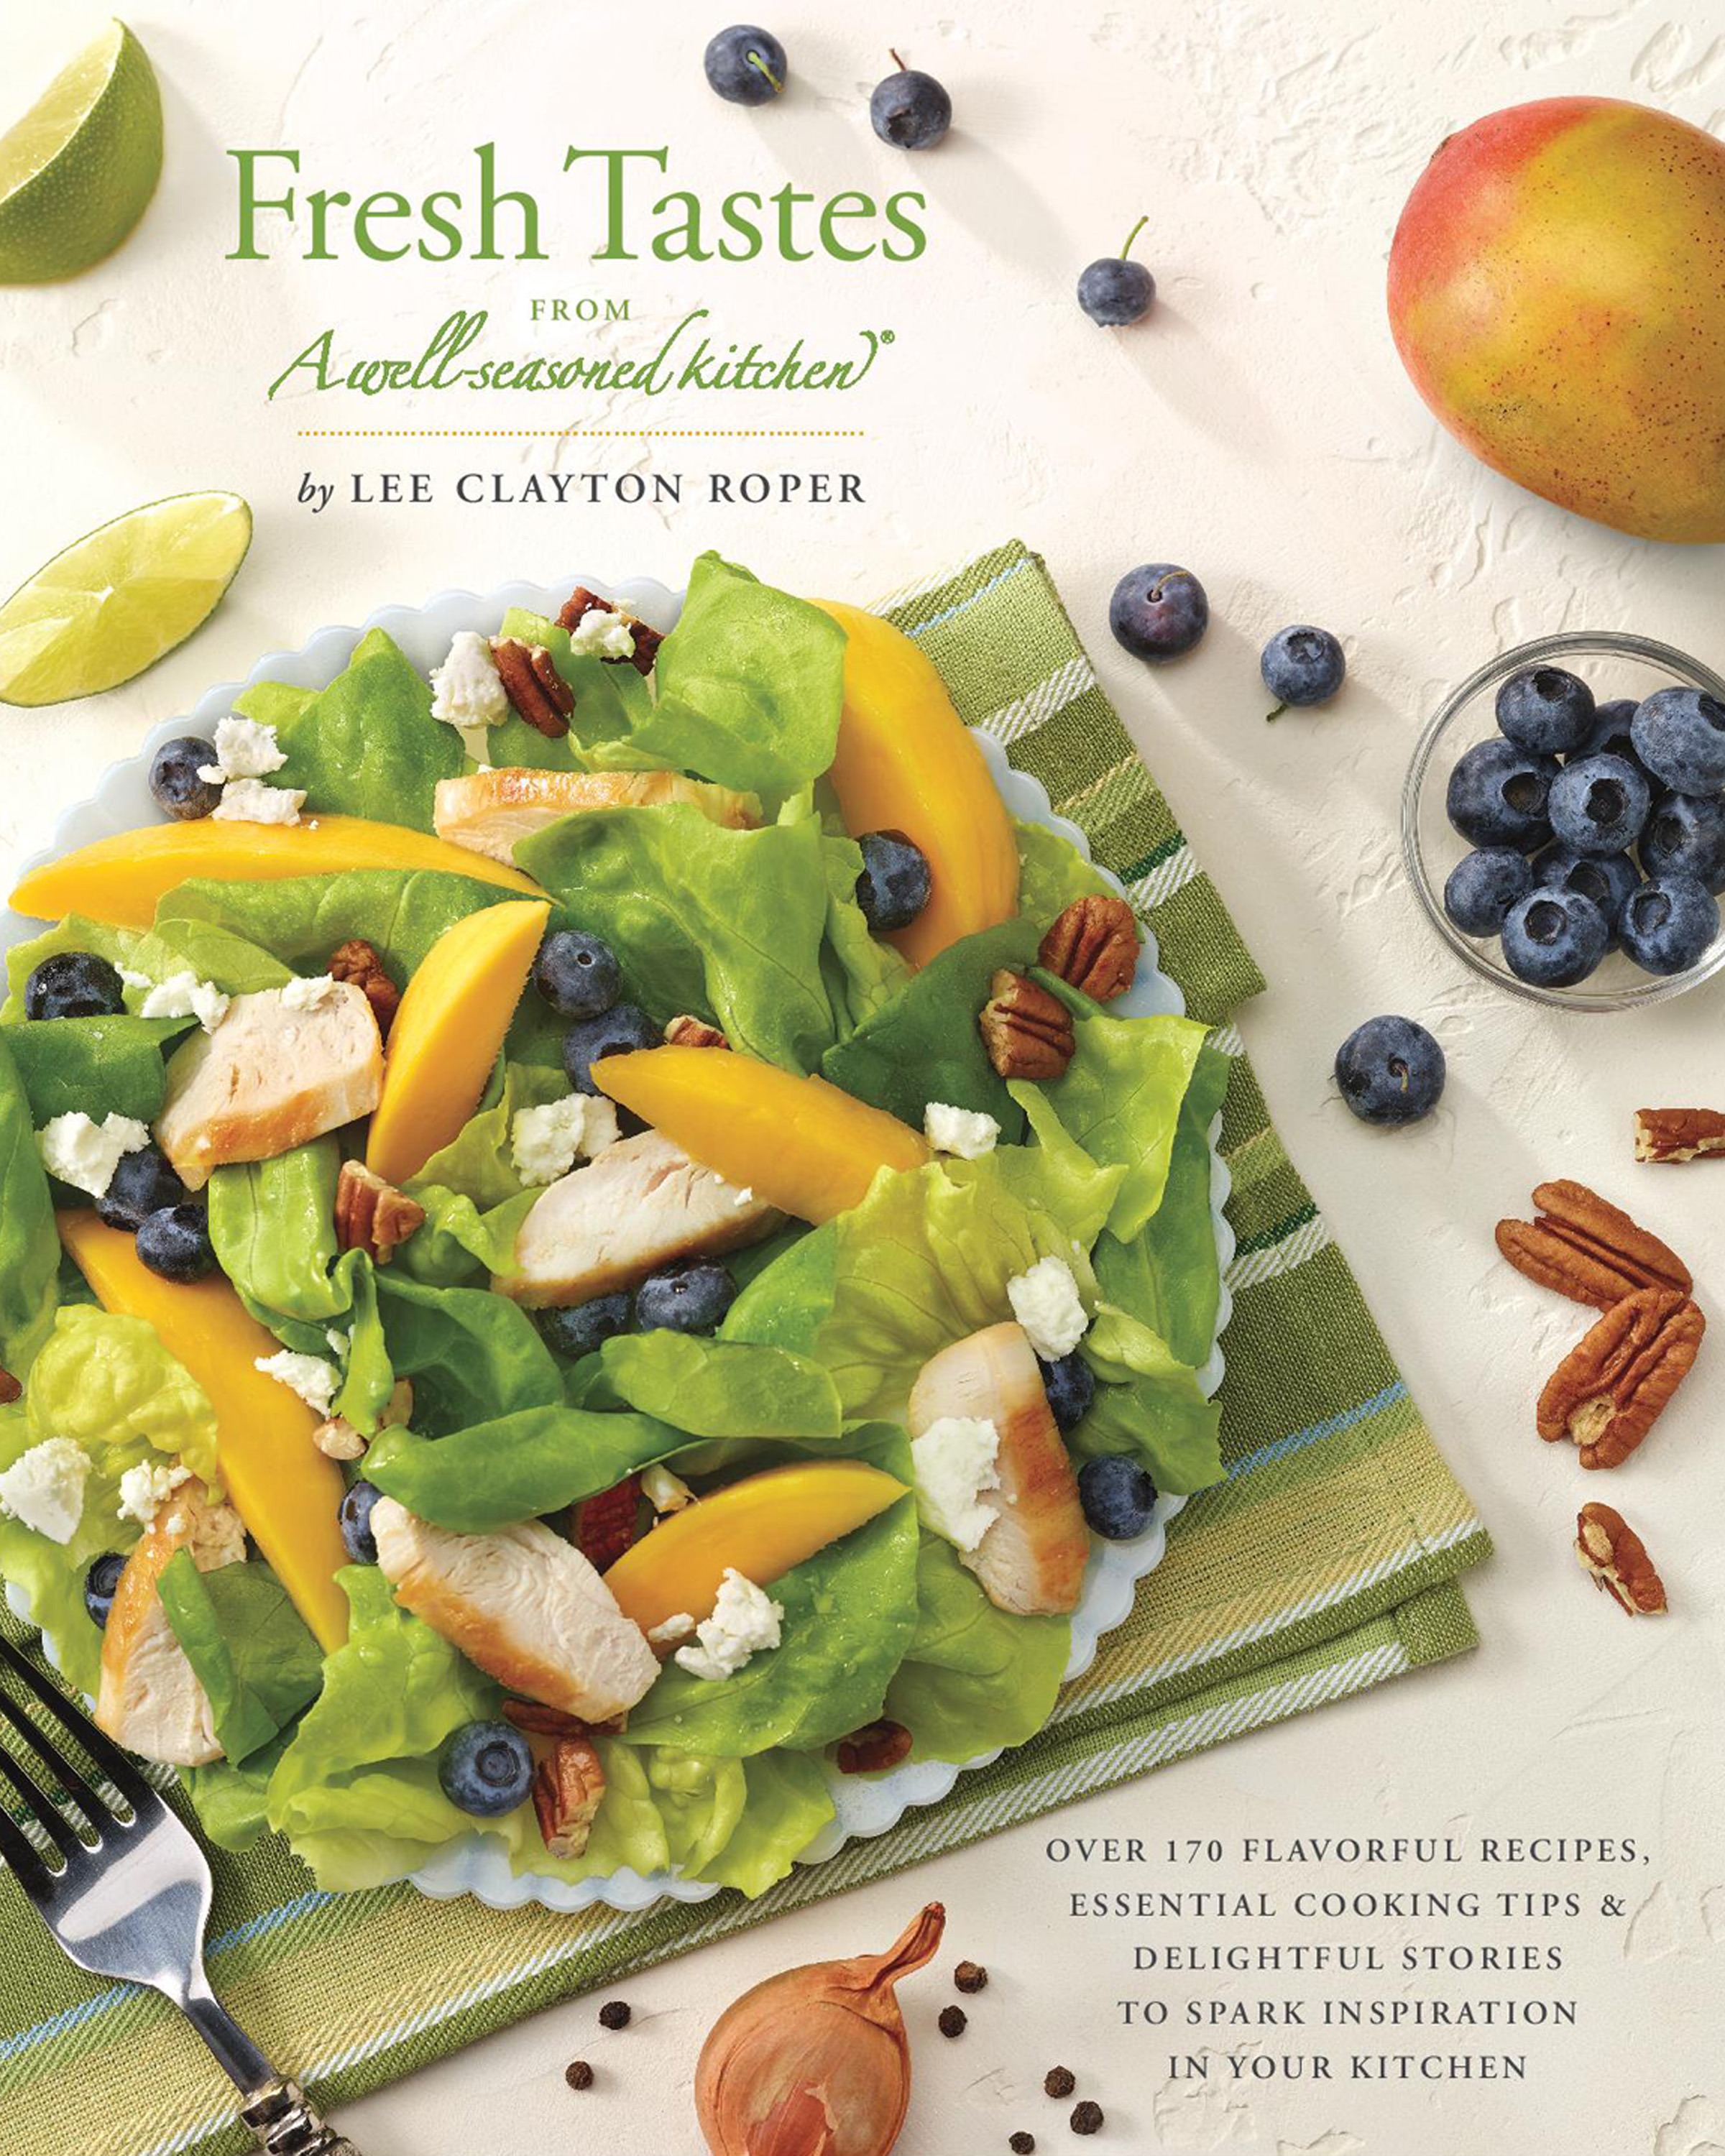 Cookbook cover for Fresh Tastes by Lee Clayton Roper